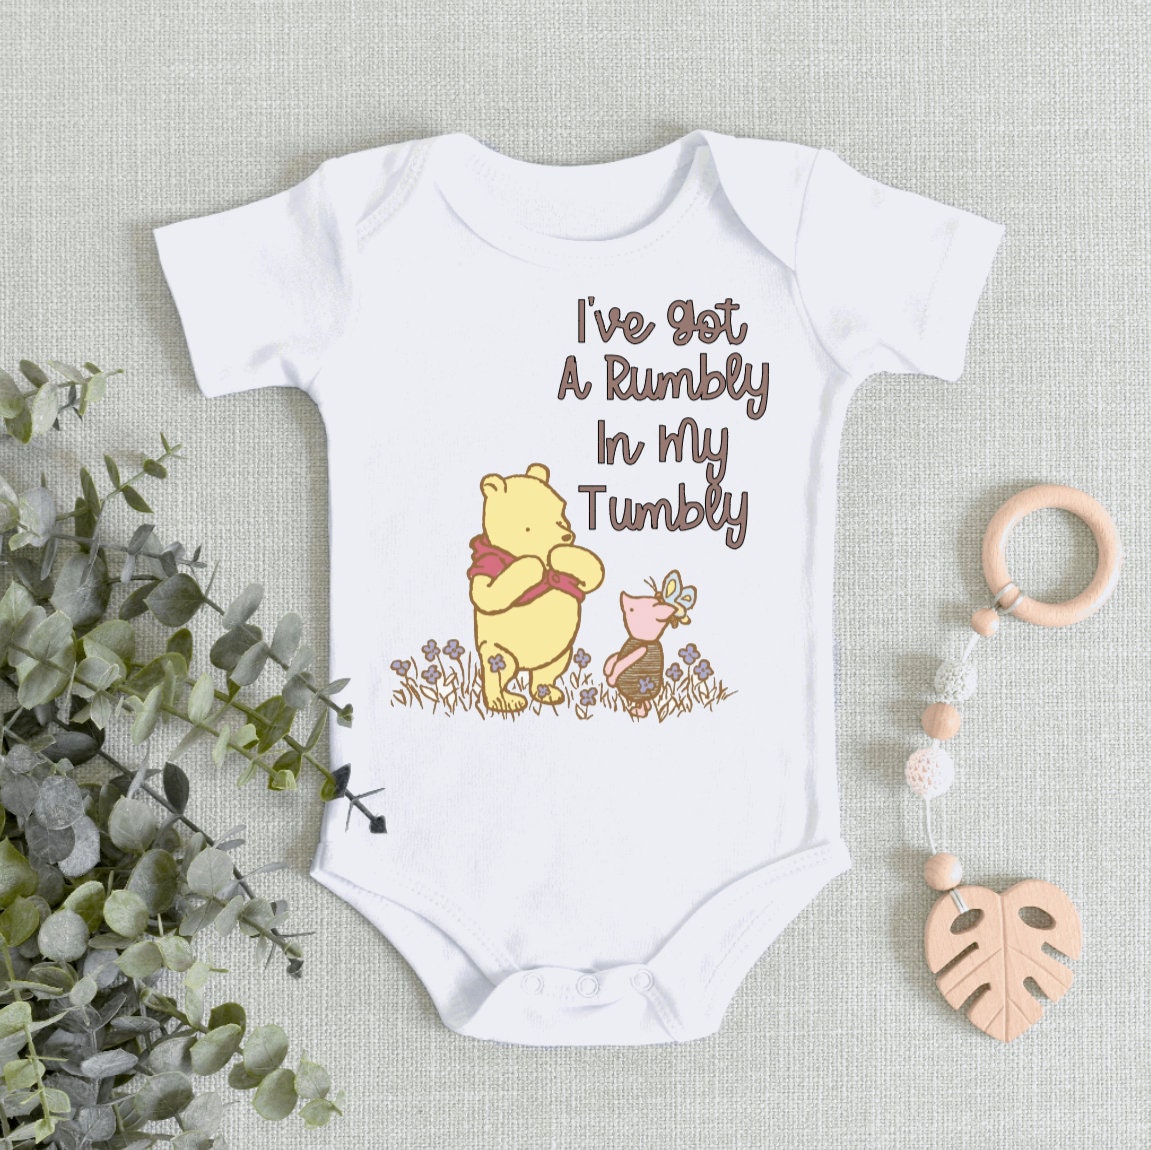 Vintage Pooh Rumbly in my Tumbly Onesie